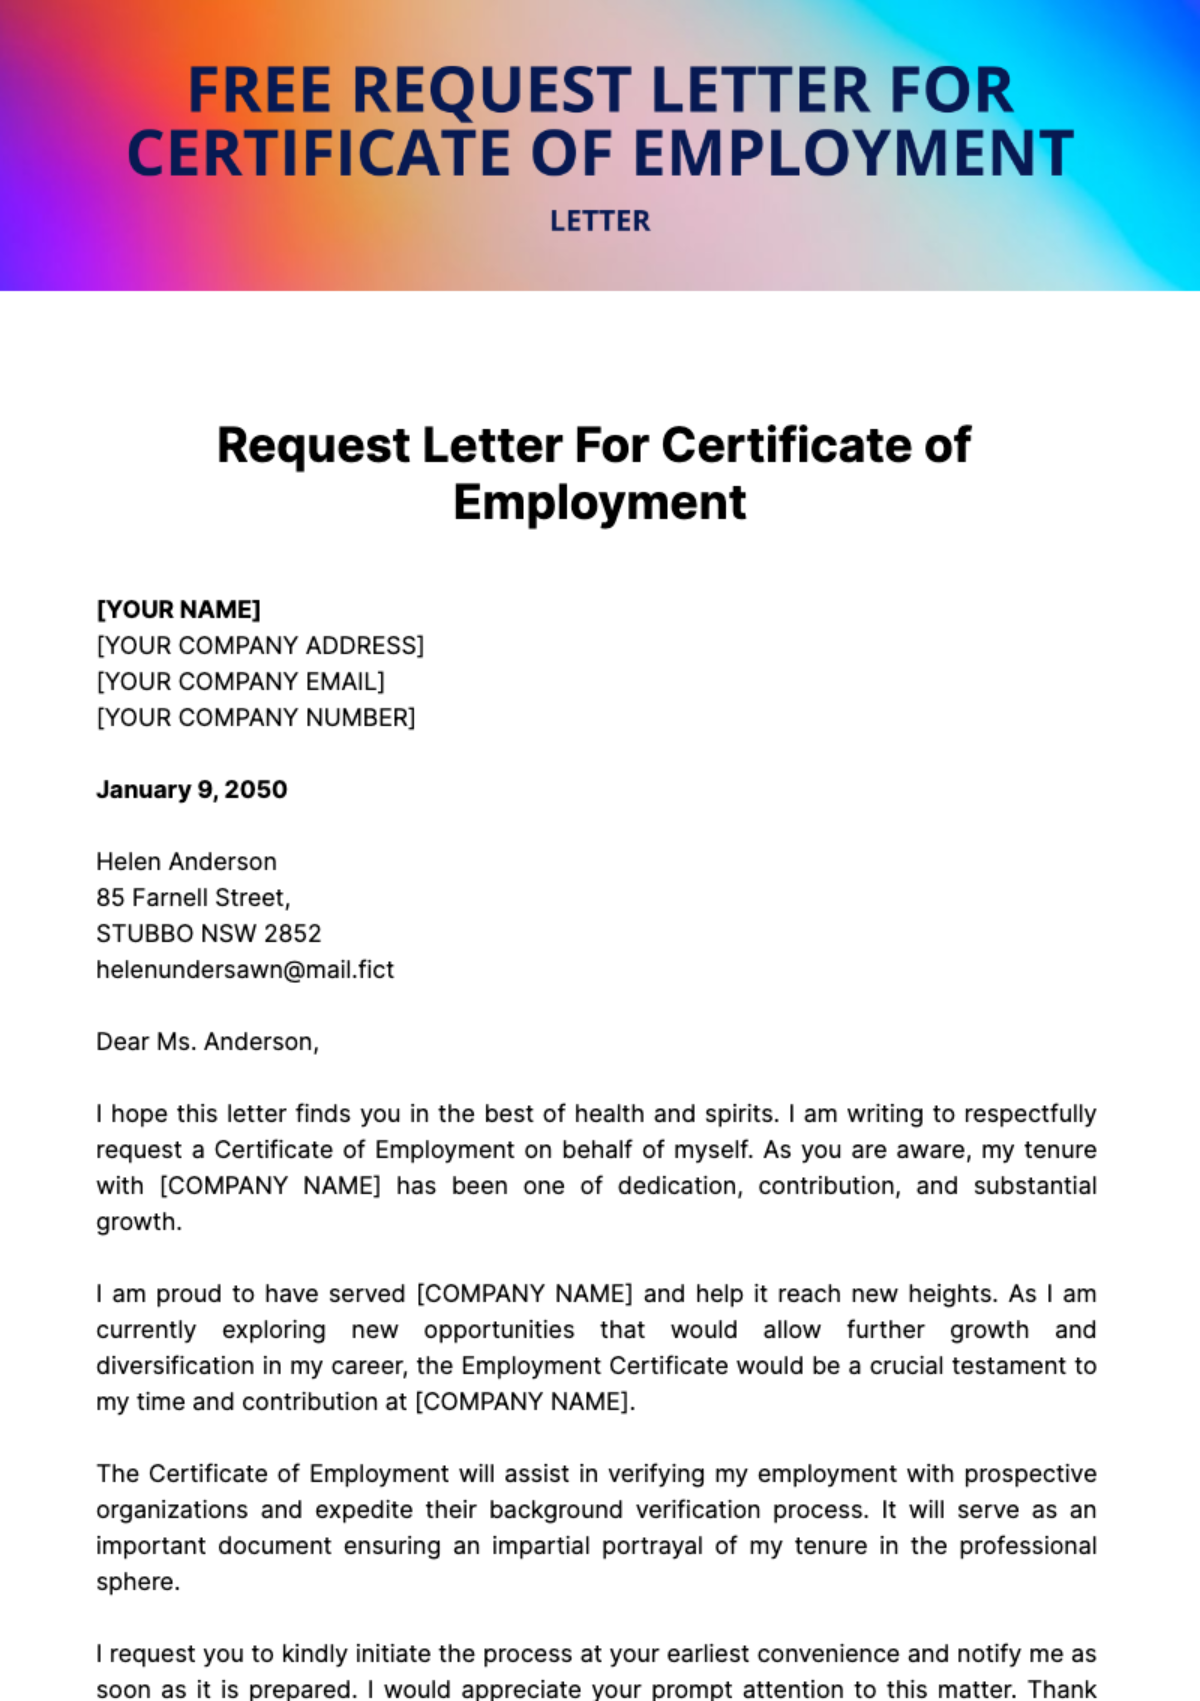 Request Letter for Certificate of Employment Template